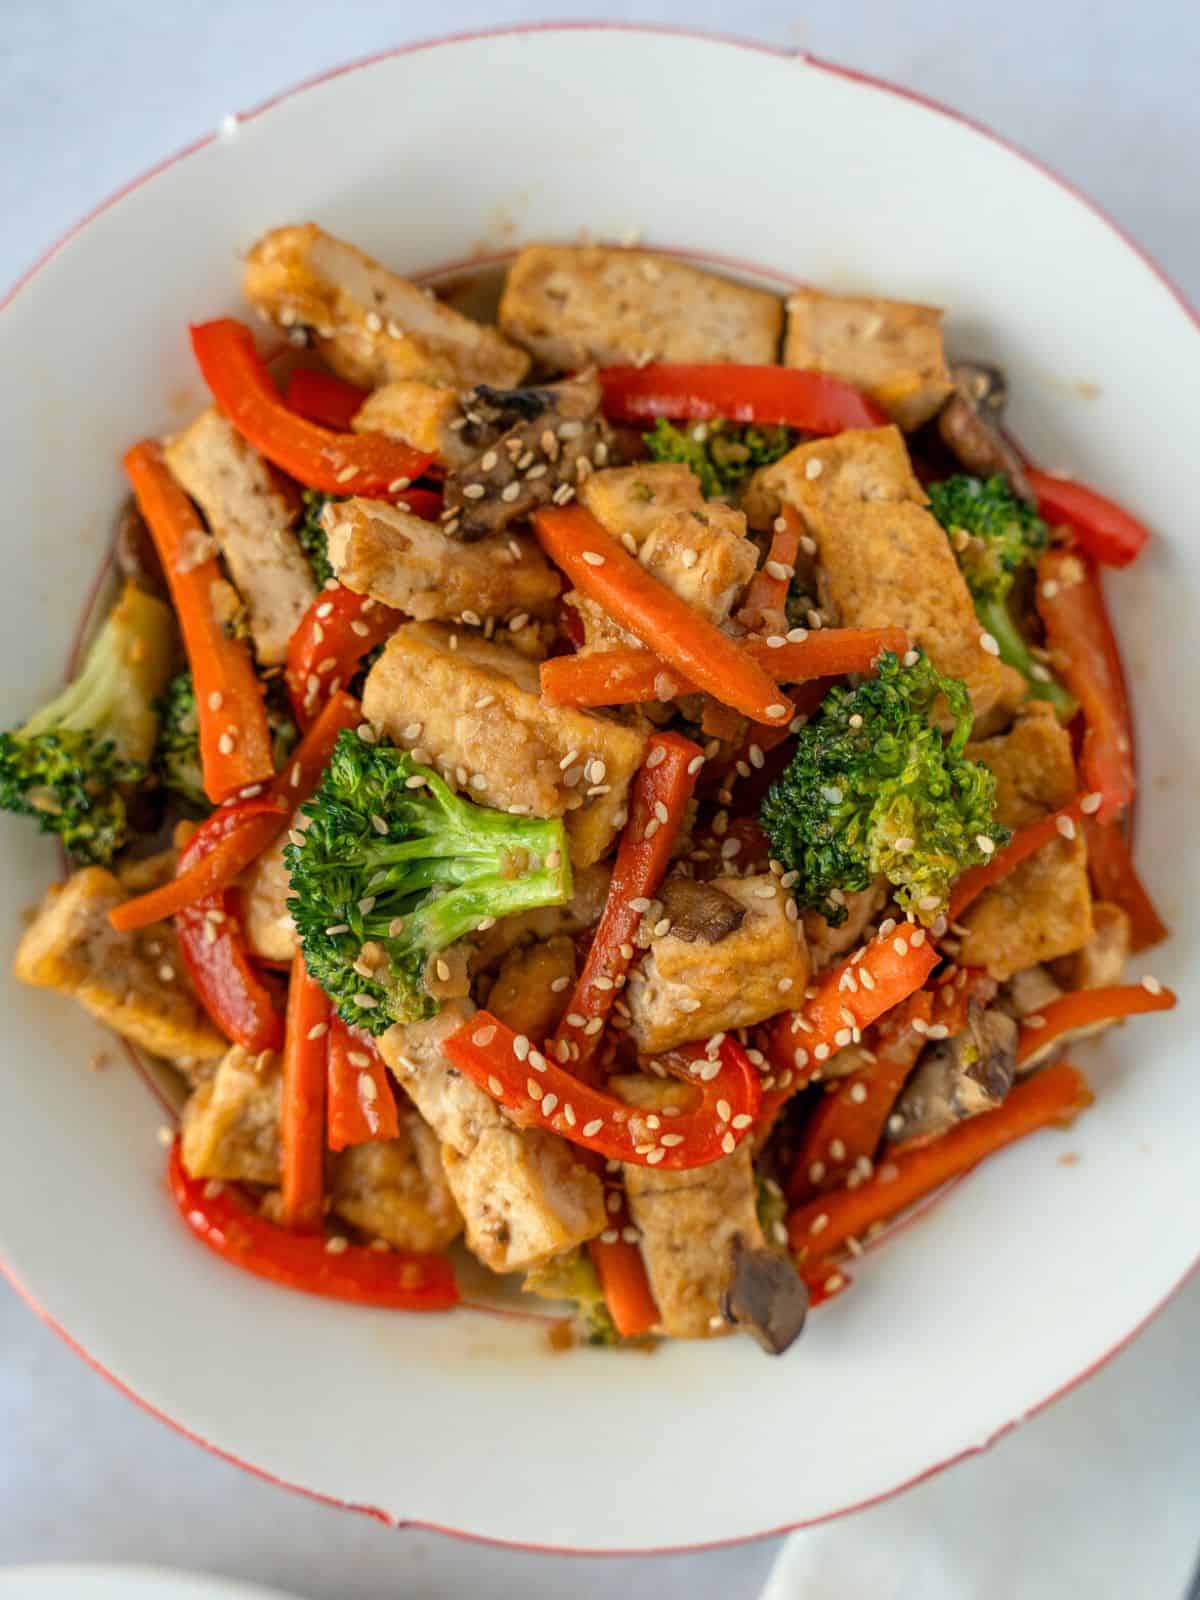 Overhead view of Tofu and Vegetable stir fry on a plate.